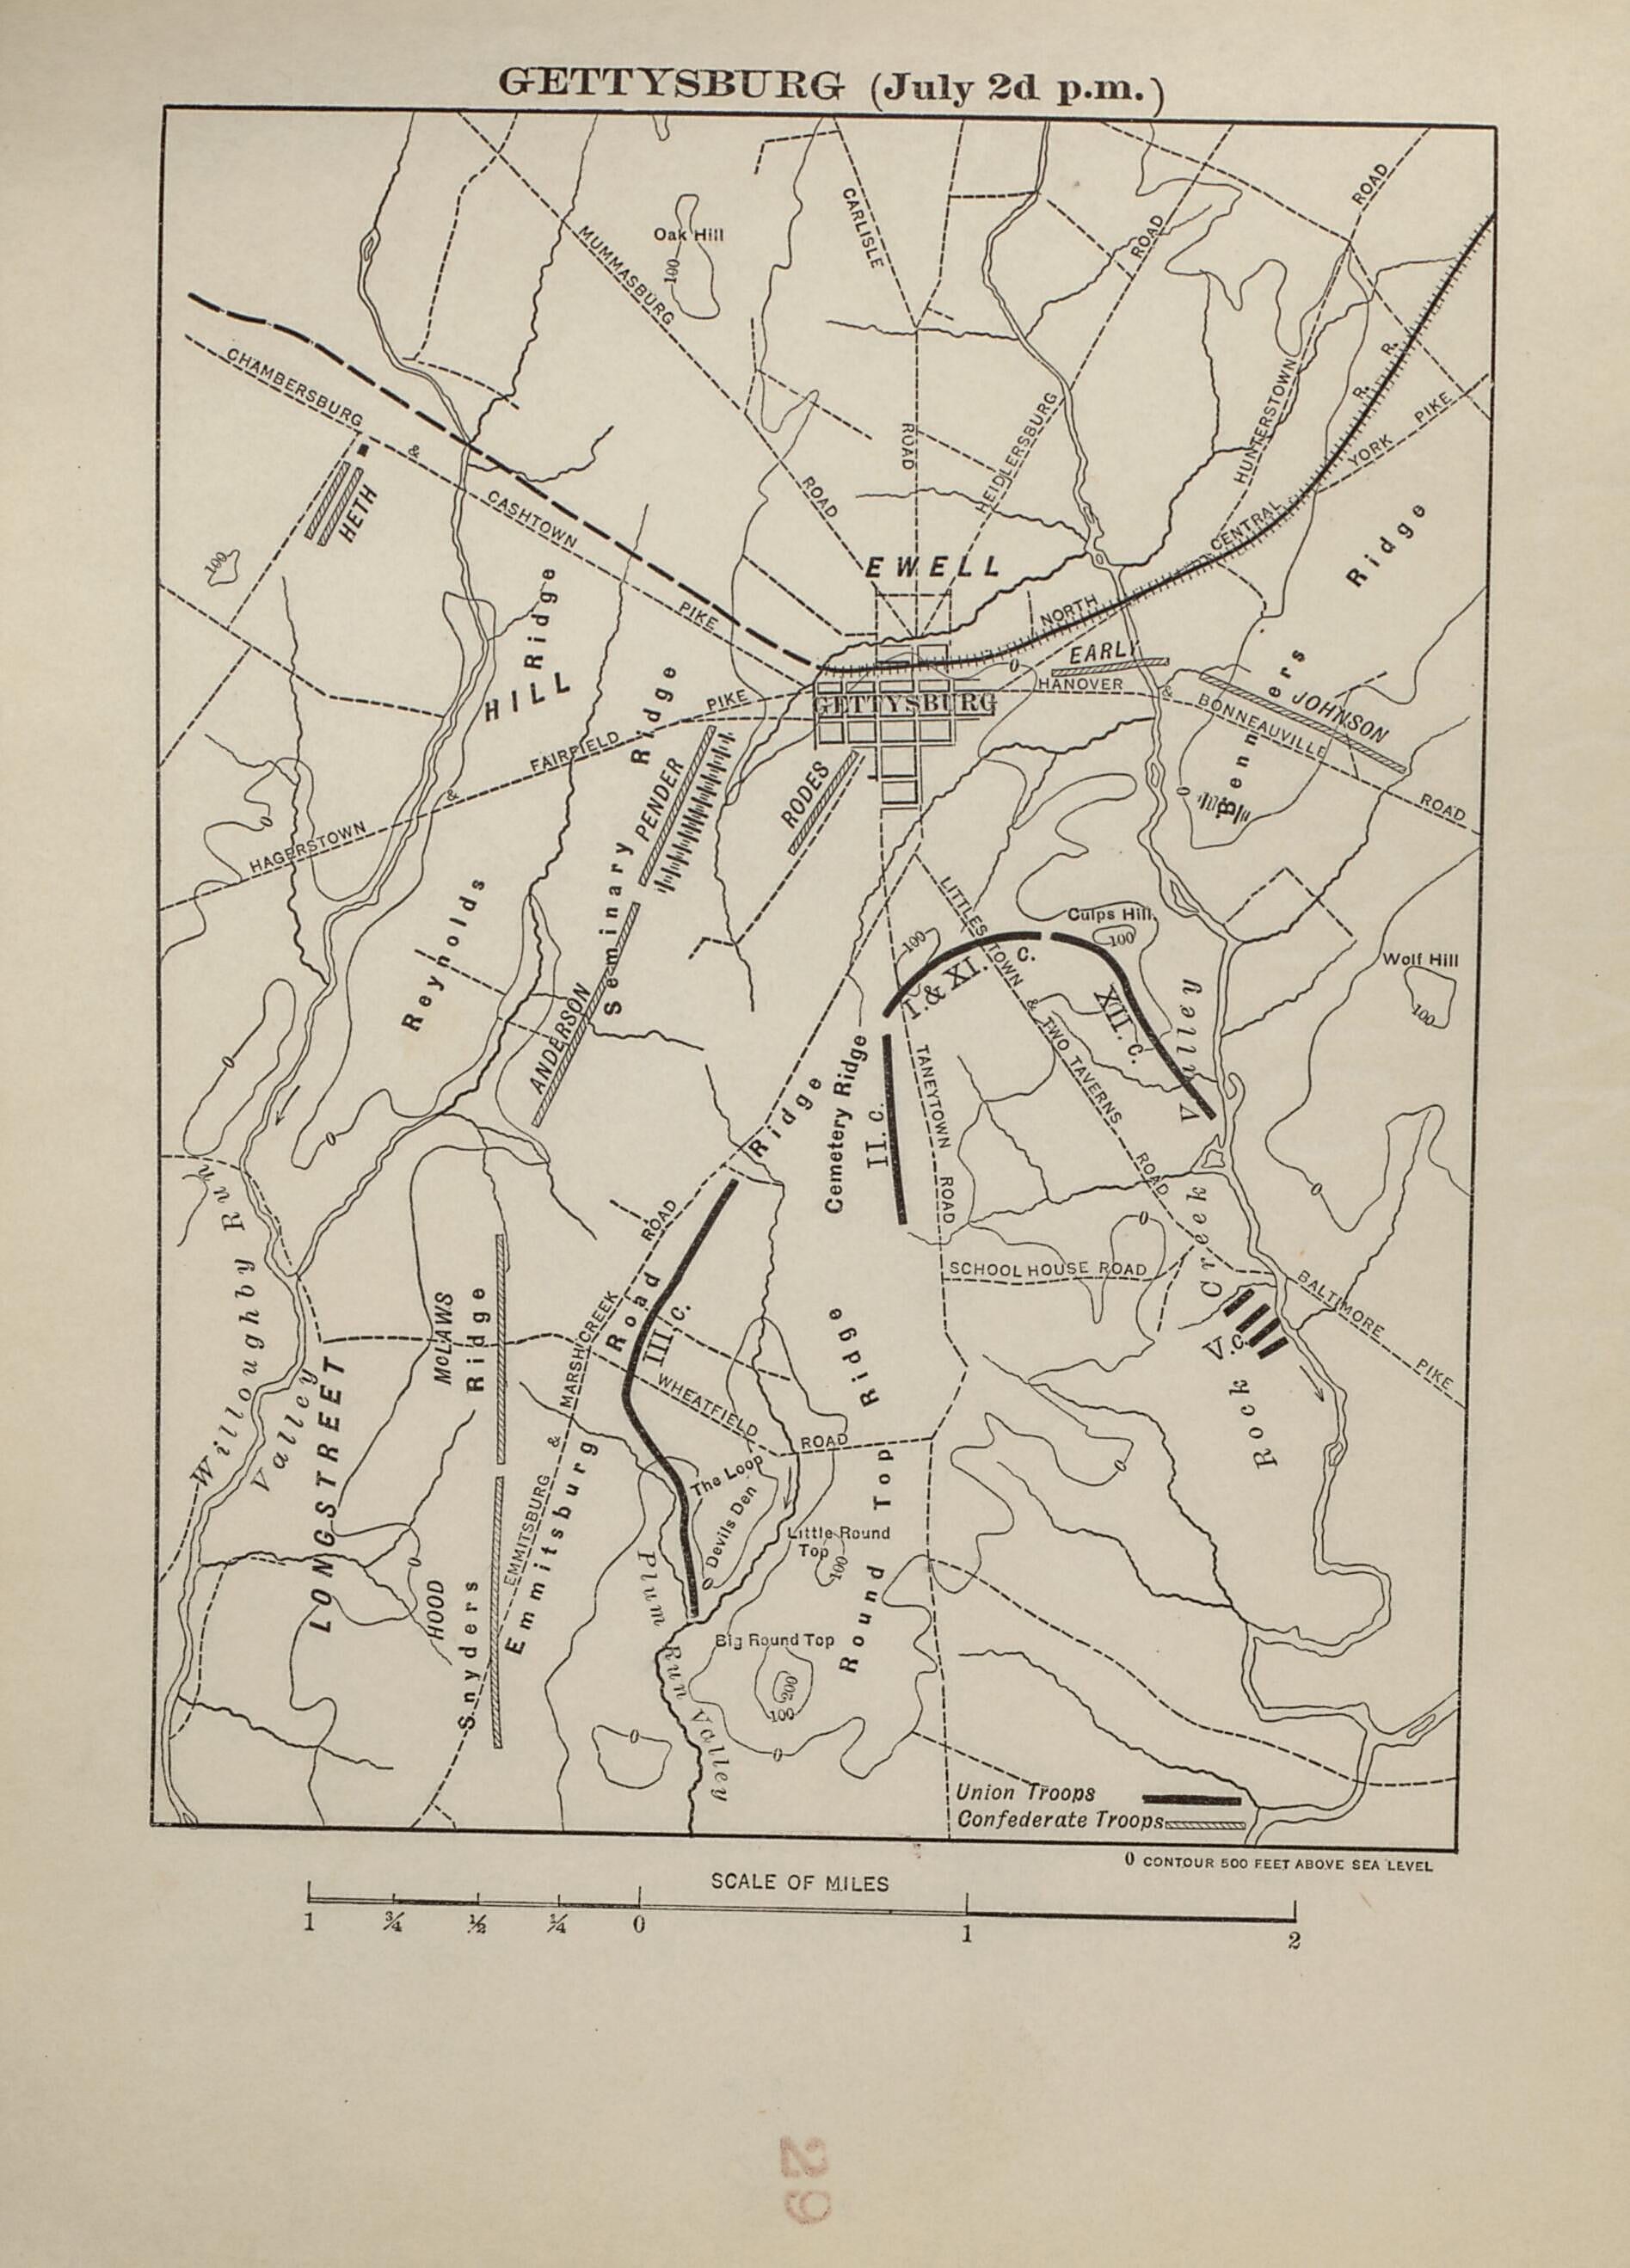 This old map of Gettysburg (July 2d P.m.) from American Civil War Atlas from 1914 was created by G. J. (Gustav Joseph) Fiebeger in 1914